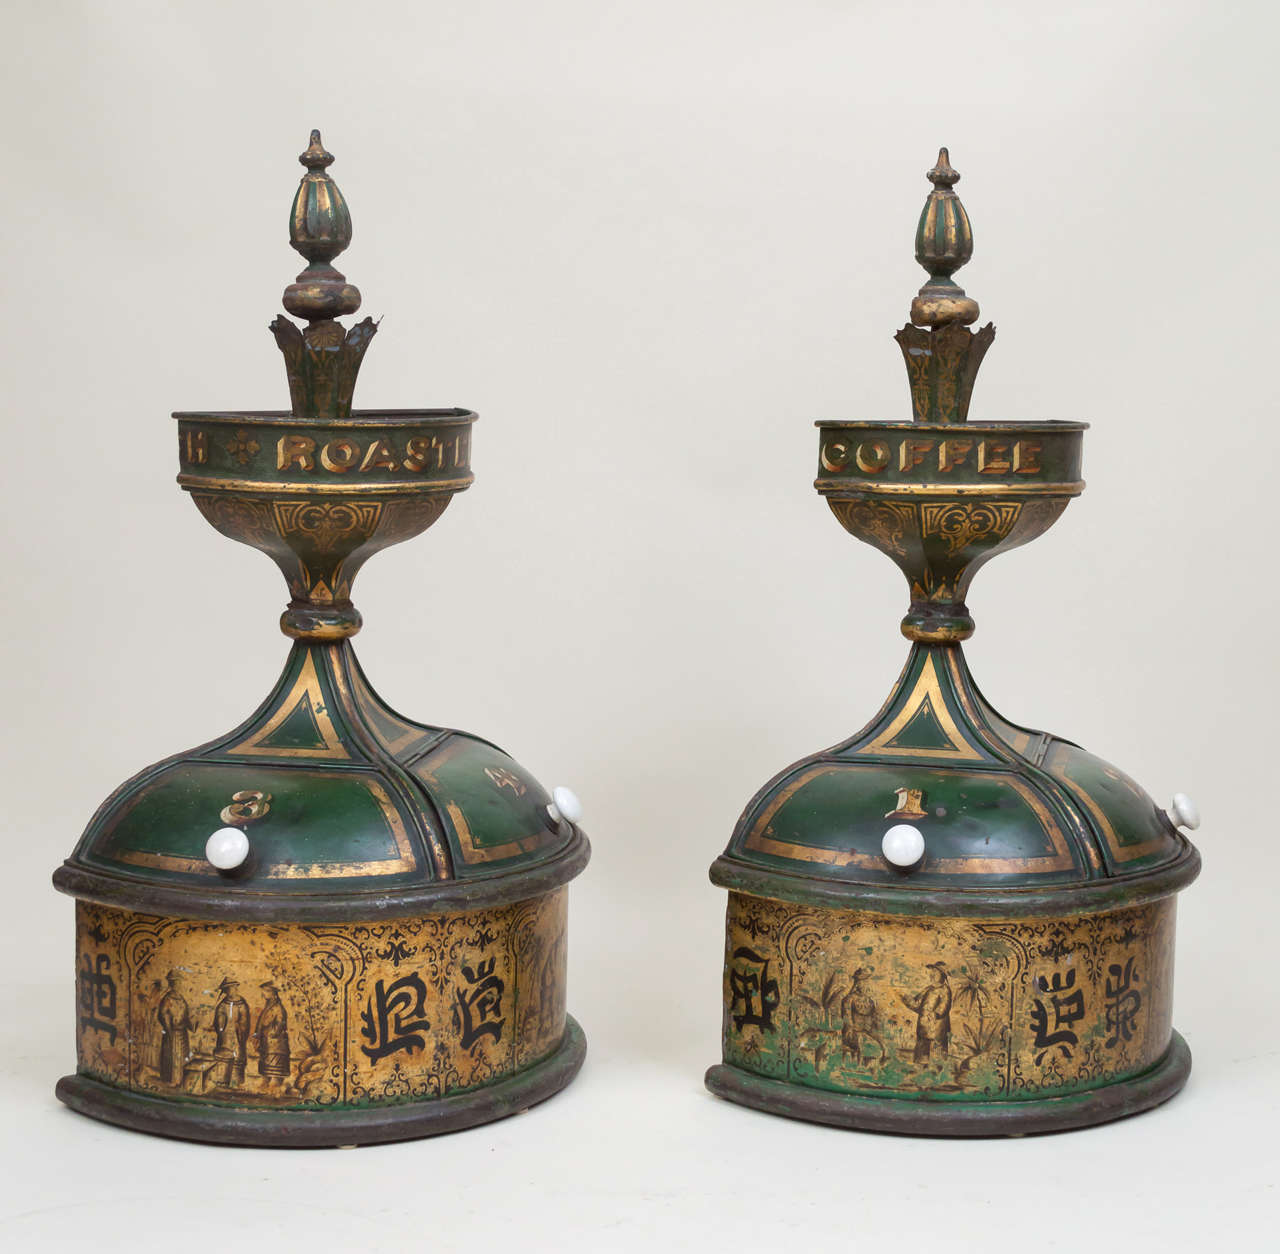 19th century English tole coffee bins, pair. Victorian store displays. Japanned and gilt decoration each with two numbered bins 1, 2, 3, 4. Manufacturers label: Sutcliff & Co. Japaners, Tin Plate Workers, Grocers, Outfitters, 49 & 51 Thomas St.